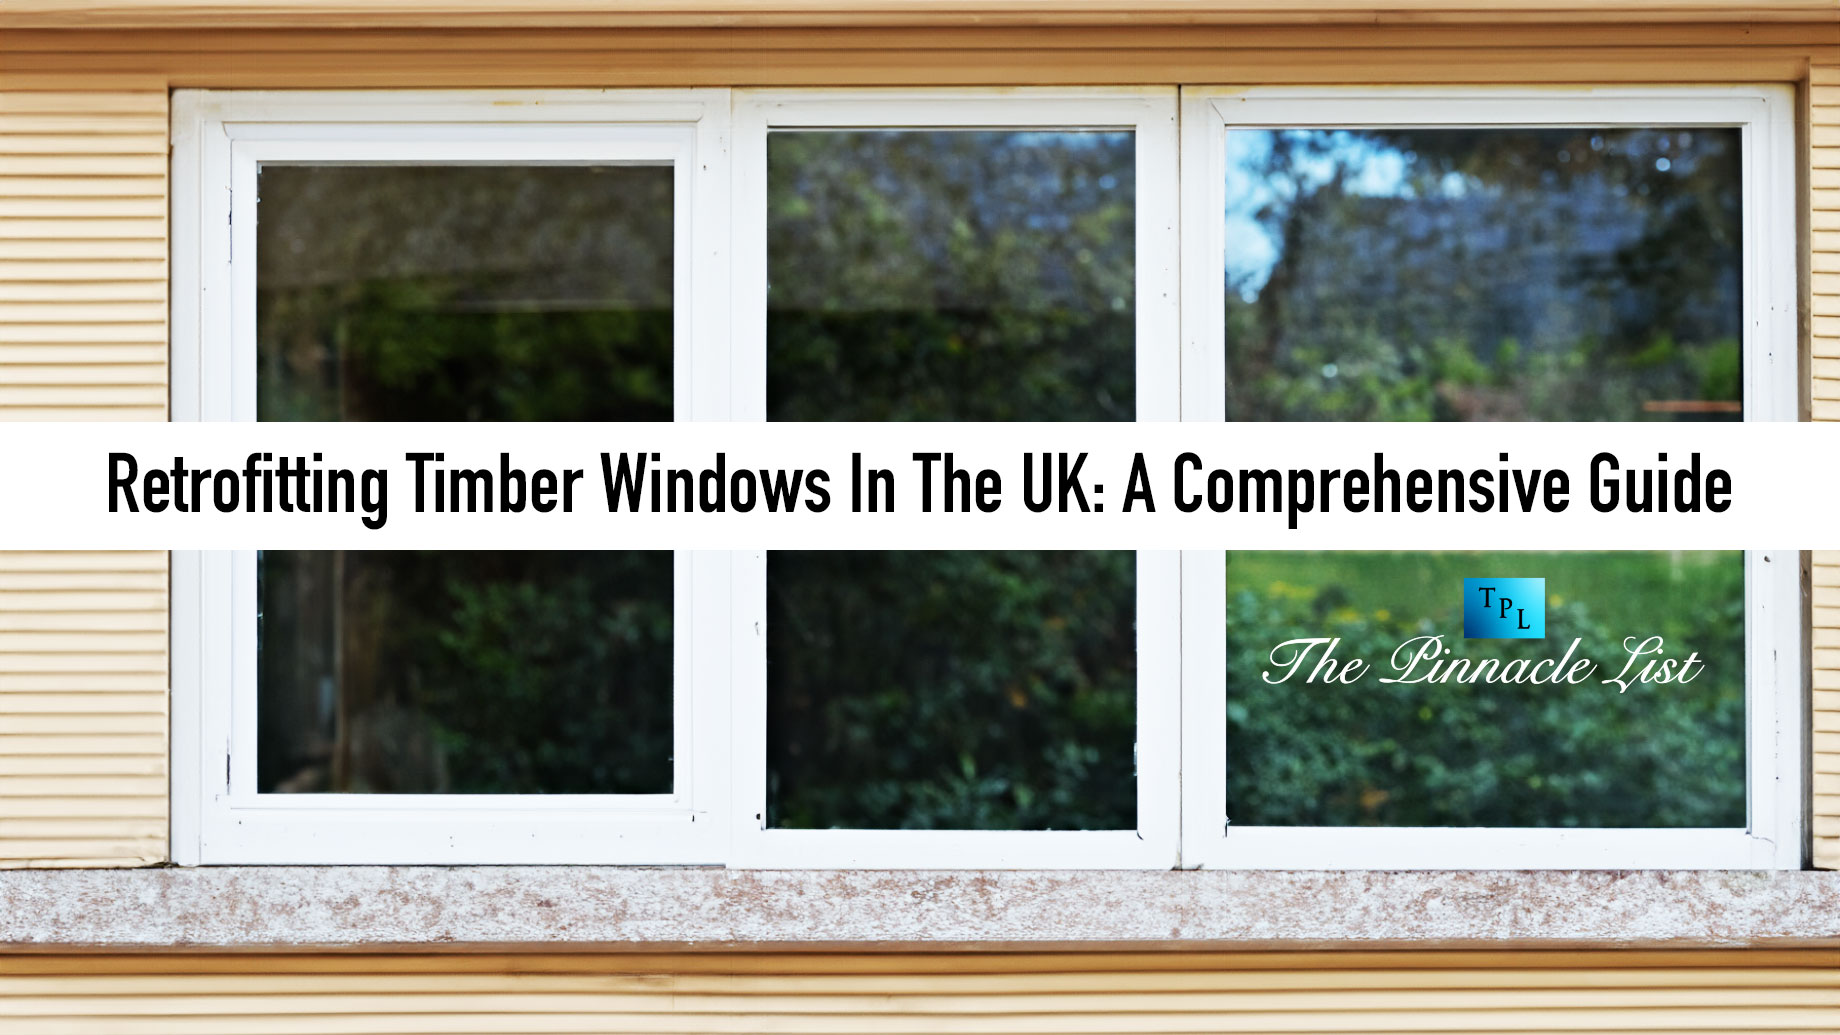 Retrofitting Timber Windows In The UK: A Comprehensive Guide